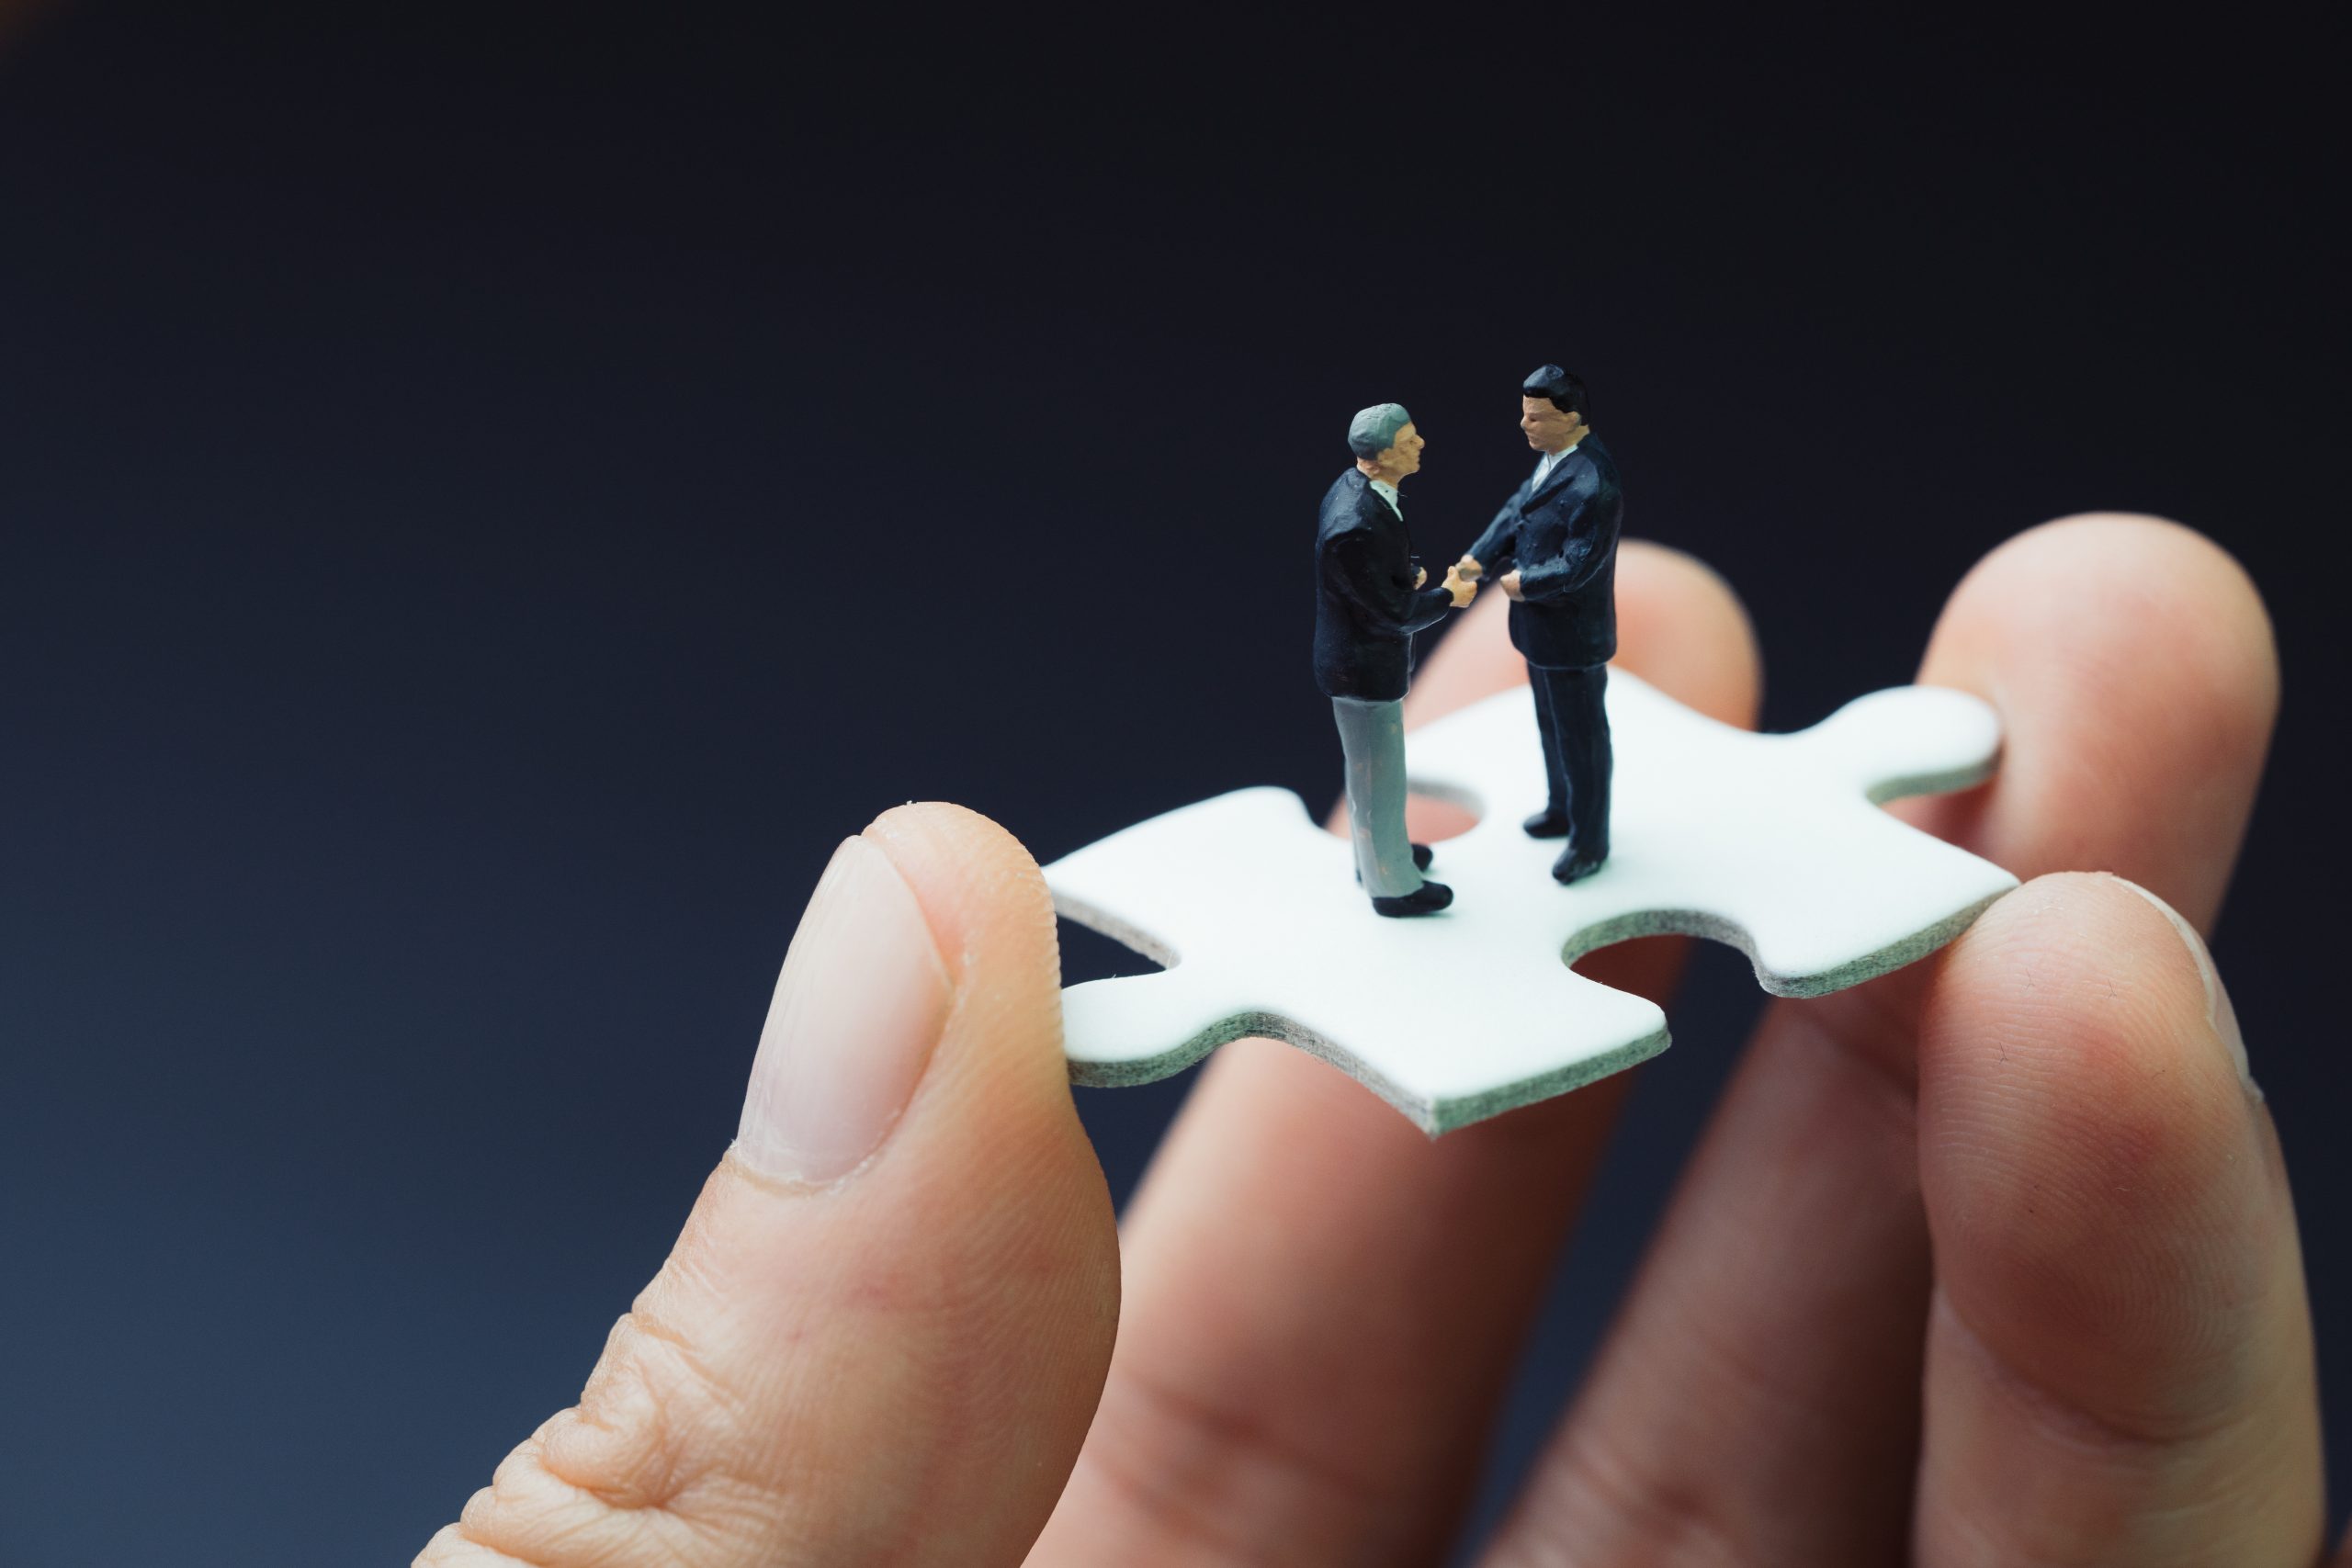 Two miniature figures standing on a puzzle piece held by human fingers, symbolizing collaboration and problem-solving in legal disputes.